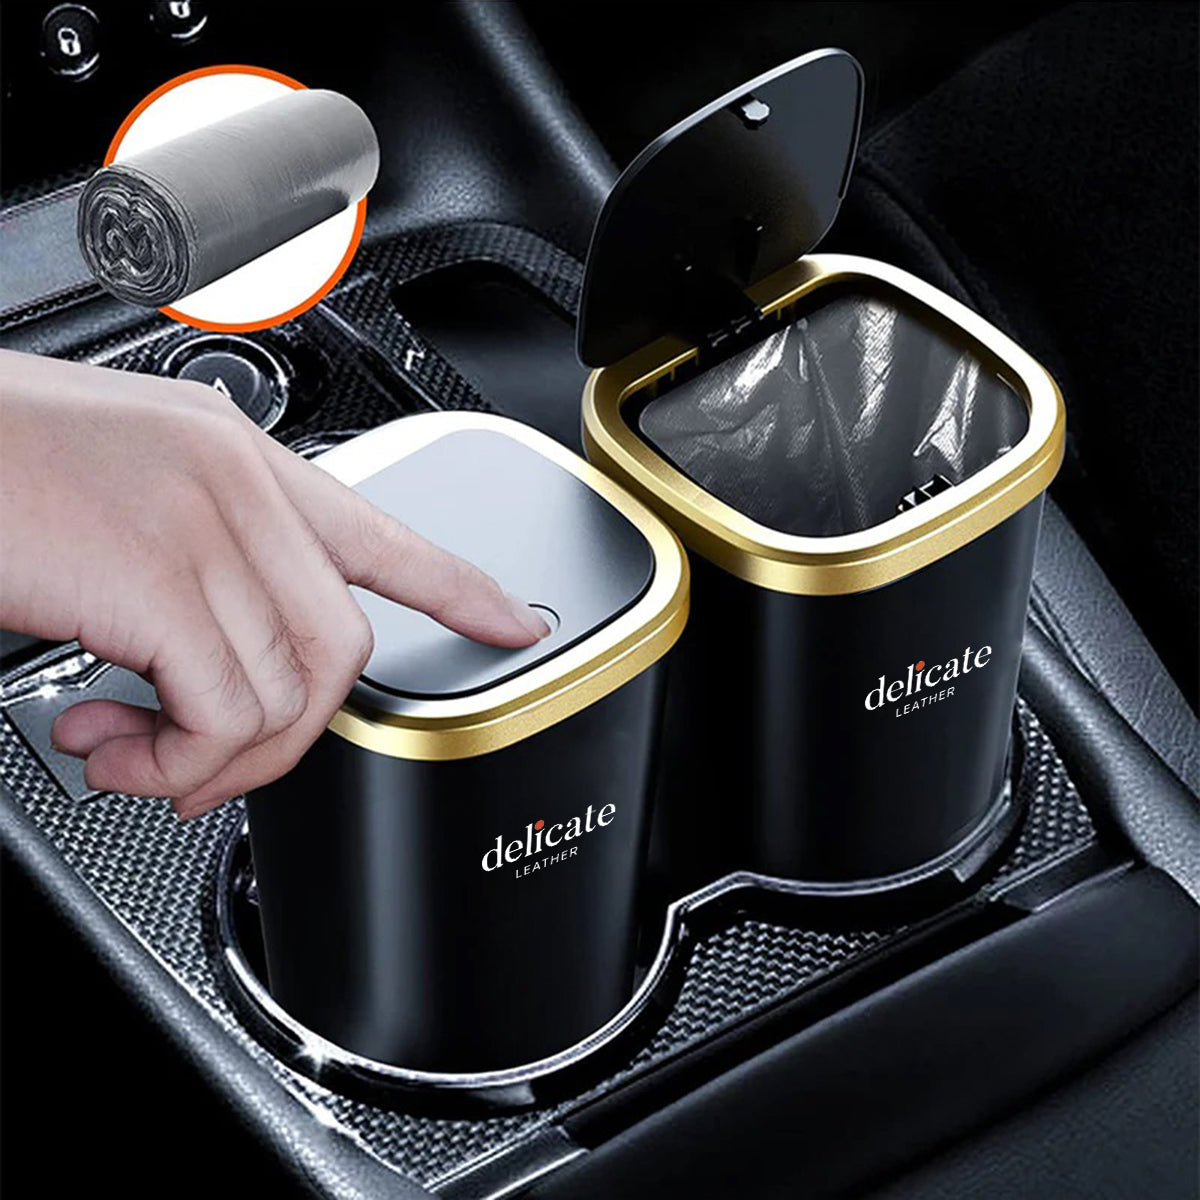 Car Trash Cans, Custom For Your Cars, Compact & Durable Car Accessories for Interior Use 2 Pack, Practical Car Organizers and Storage Cups with Pop-Up Open, Car Accessories PE11993 - Delicate Leather